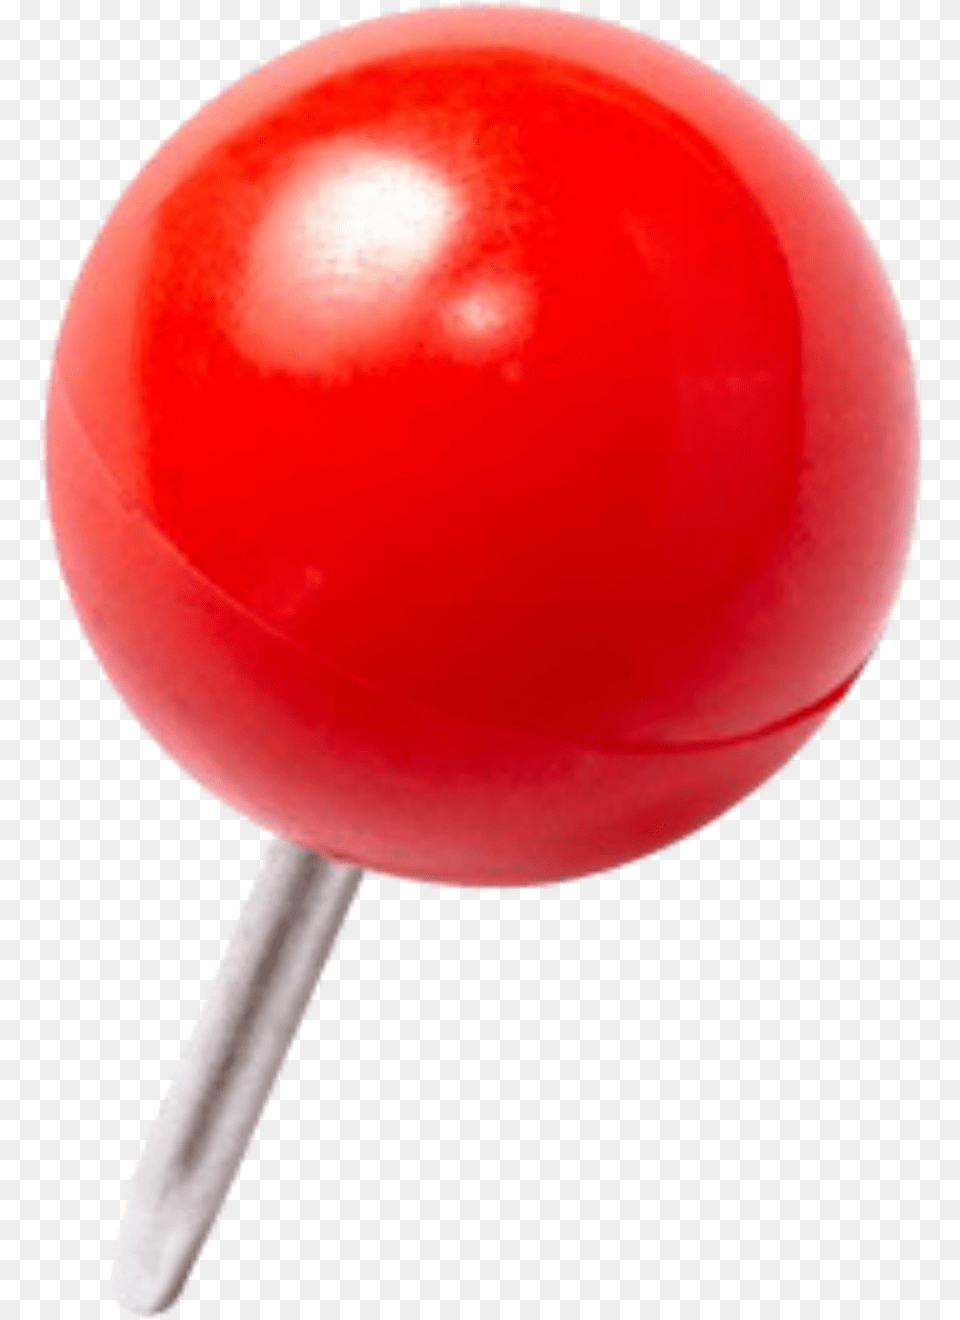 A South African Travel Blog Sphere, Candy, Food, Sweets, Lollipop Png Image